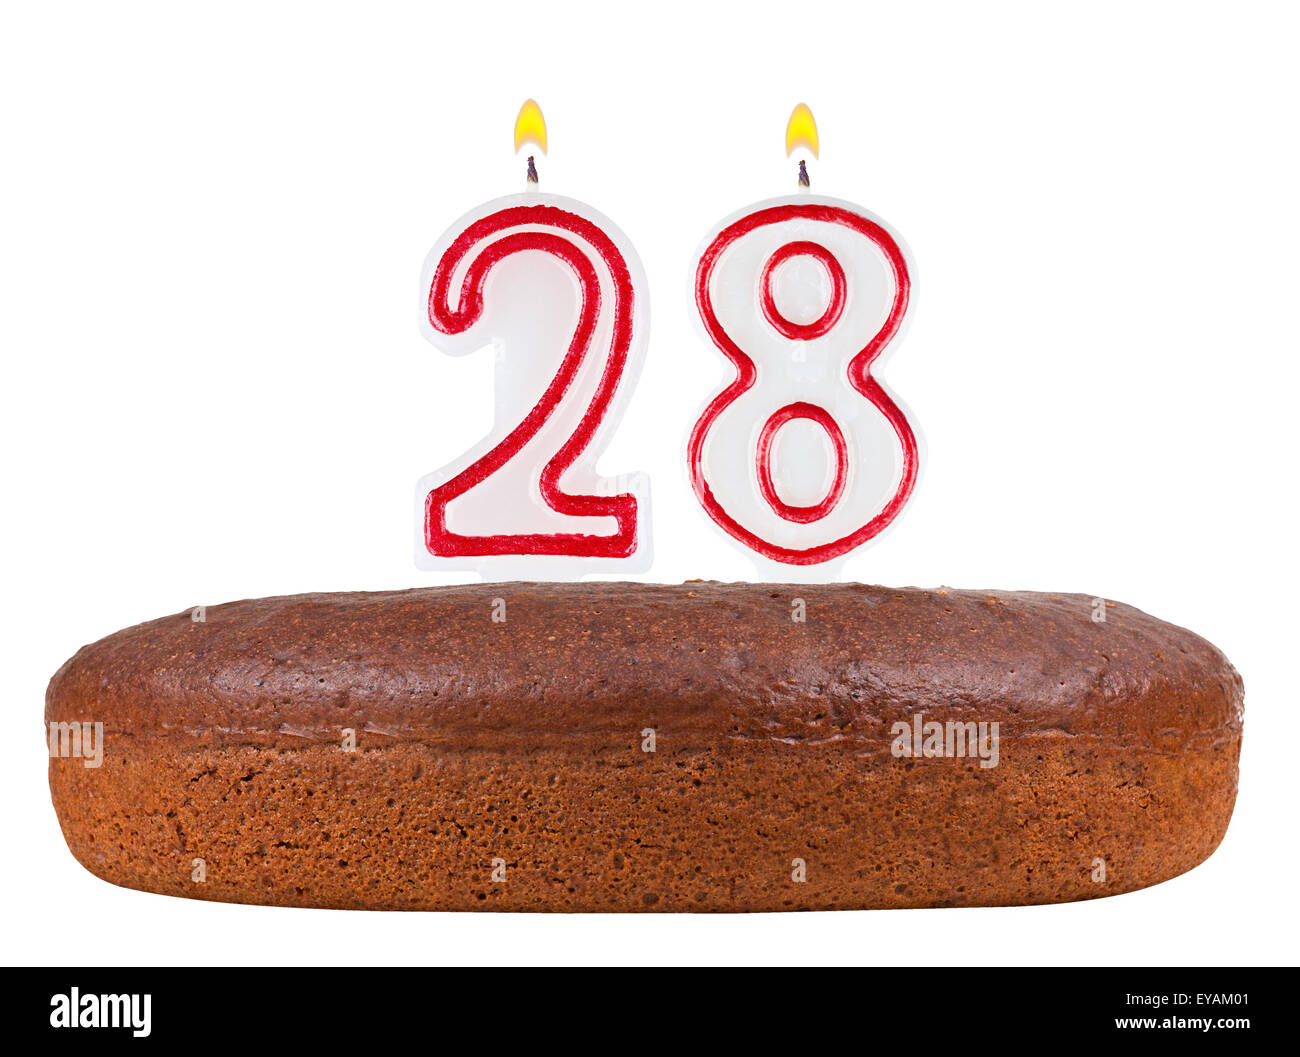 birthday cake with candles number 28 isolated on white background Stock Photo